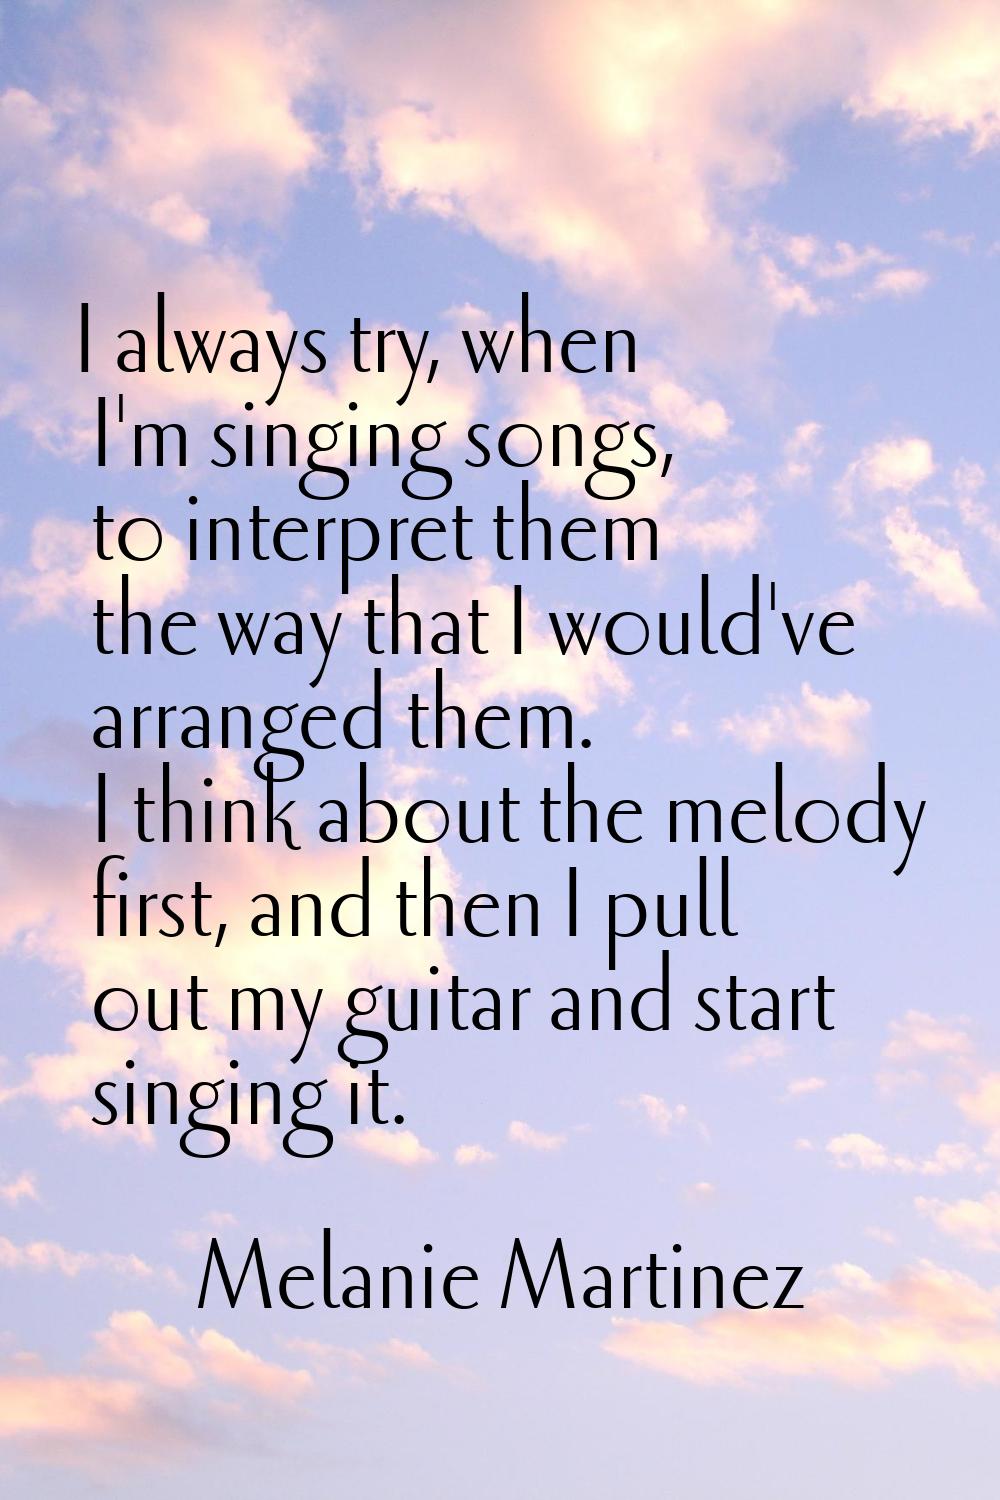 I always try, when I'm singing songs, to interpret them the way that I would've arranged them. I th